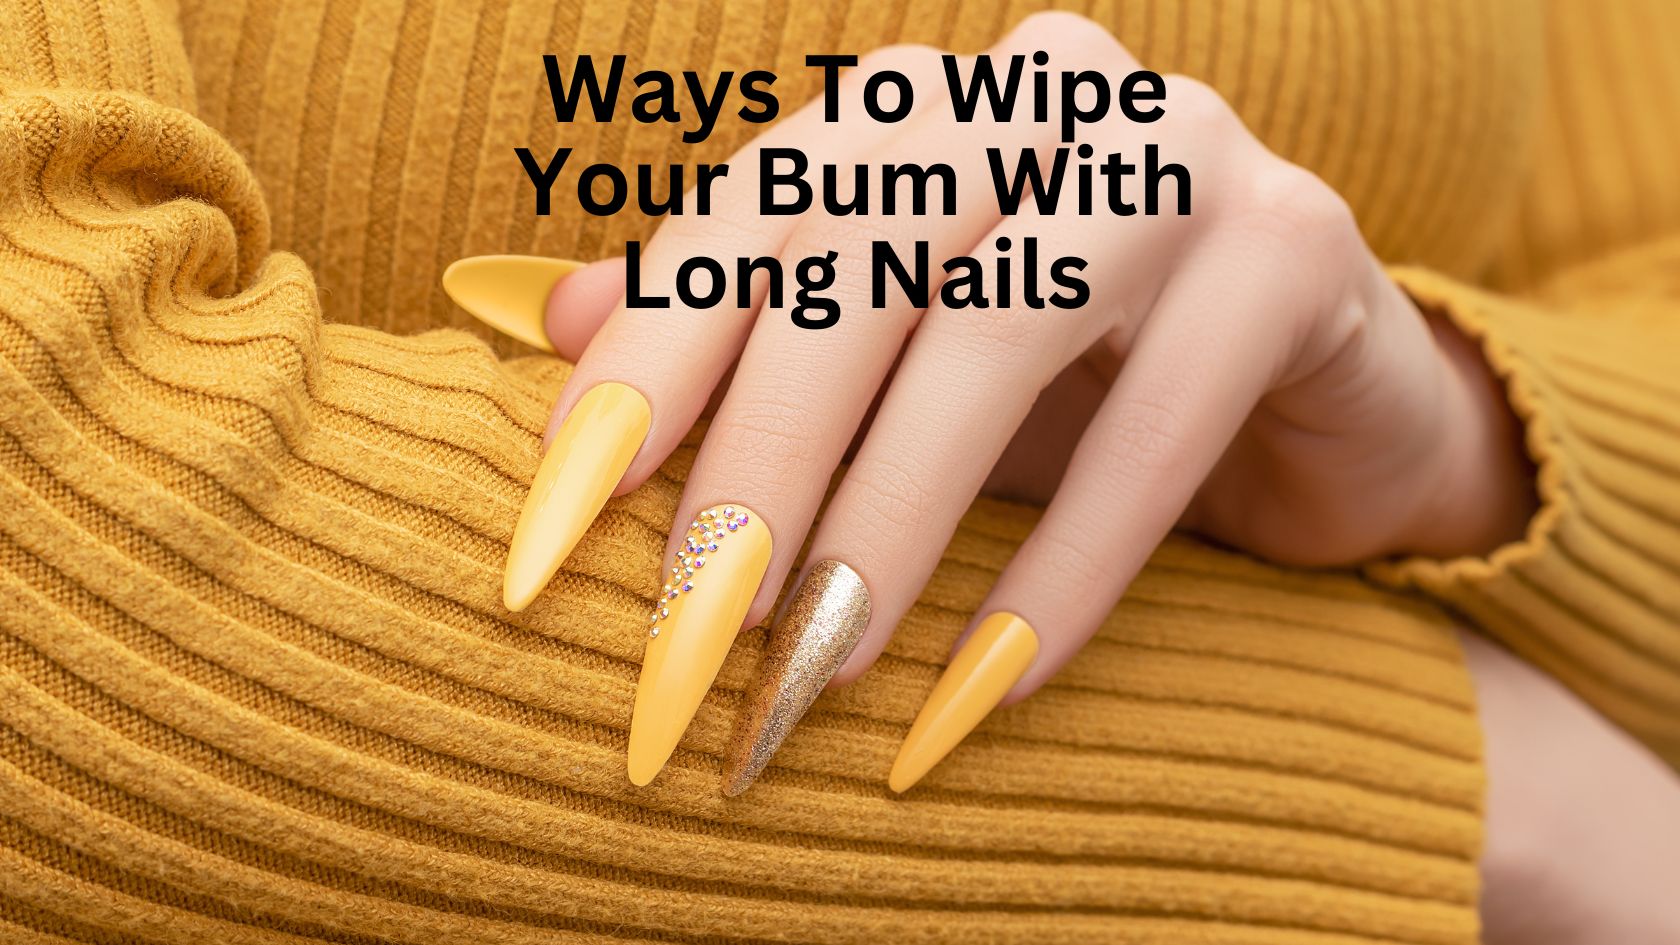 Practical Ways To Wipe Your Bum With Long Nails